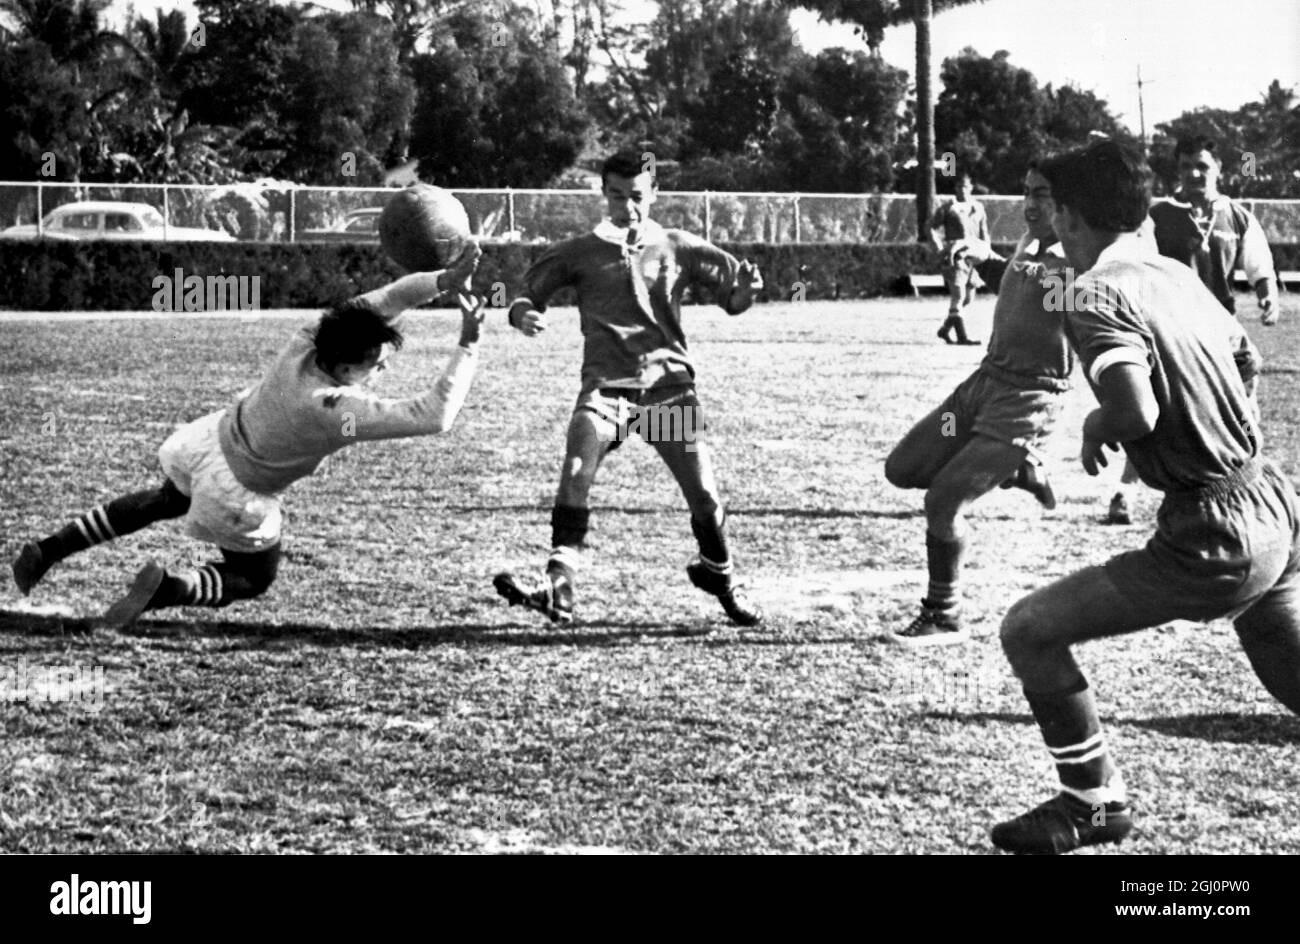 Goalkeeper Ernest Bankuti , of Magyar AC , a Hungarian soccer team , is seen saving a goal when his team played and defeated Coral Gables team at Curtis Park , Miami , USA. Three Coral Gables players are seen close at hand to try for the goal . 21 January 1958 Stock Photo